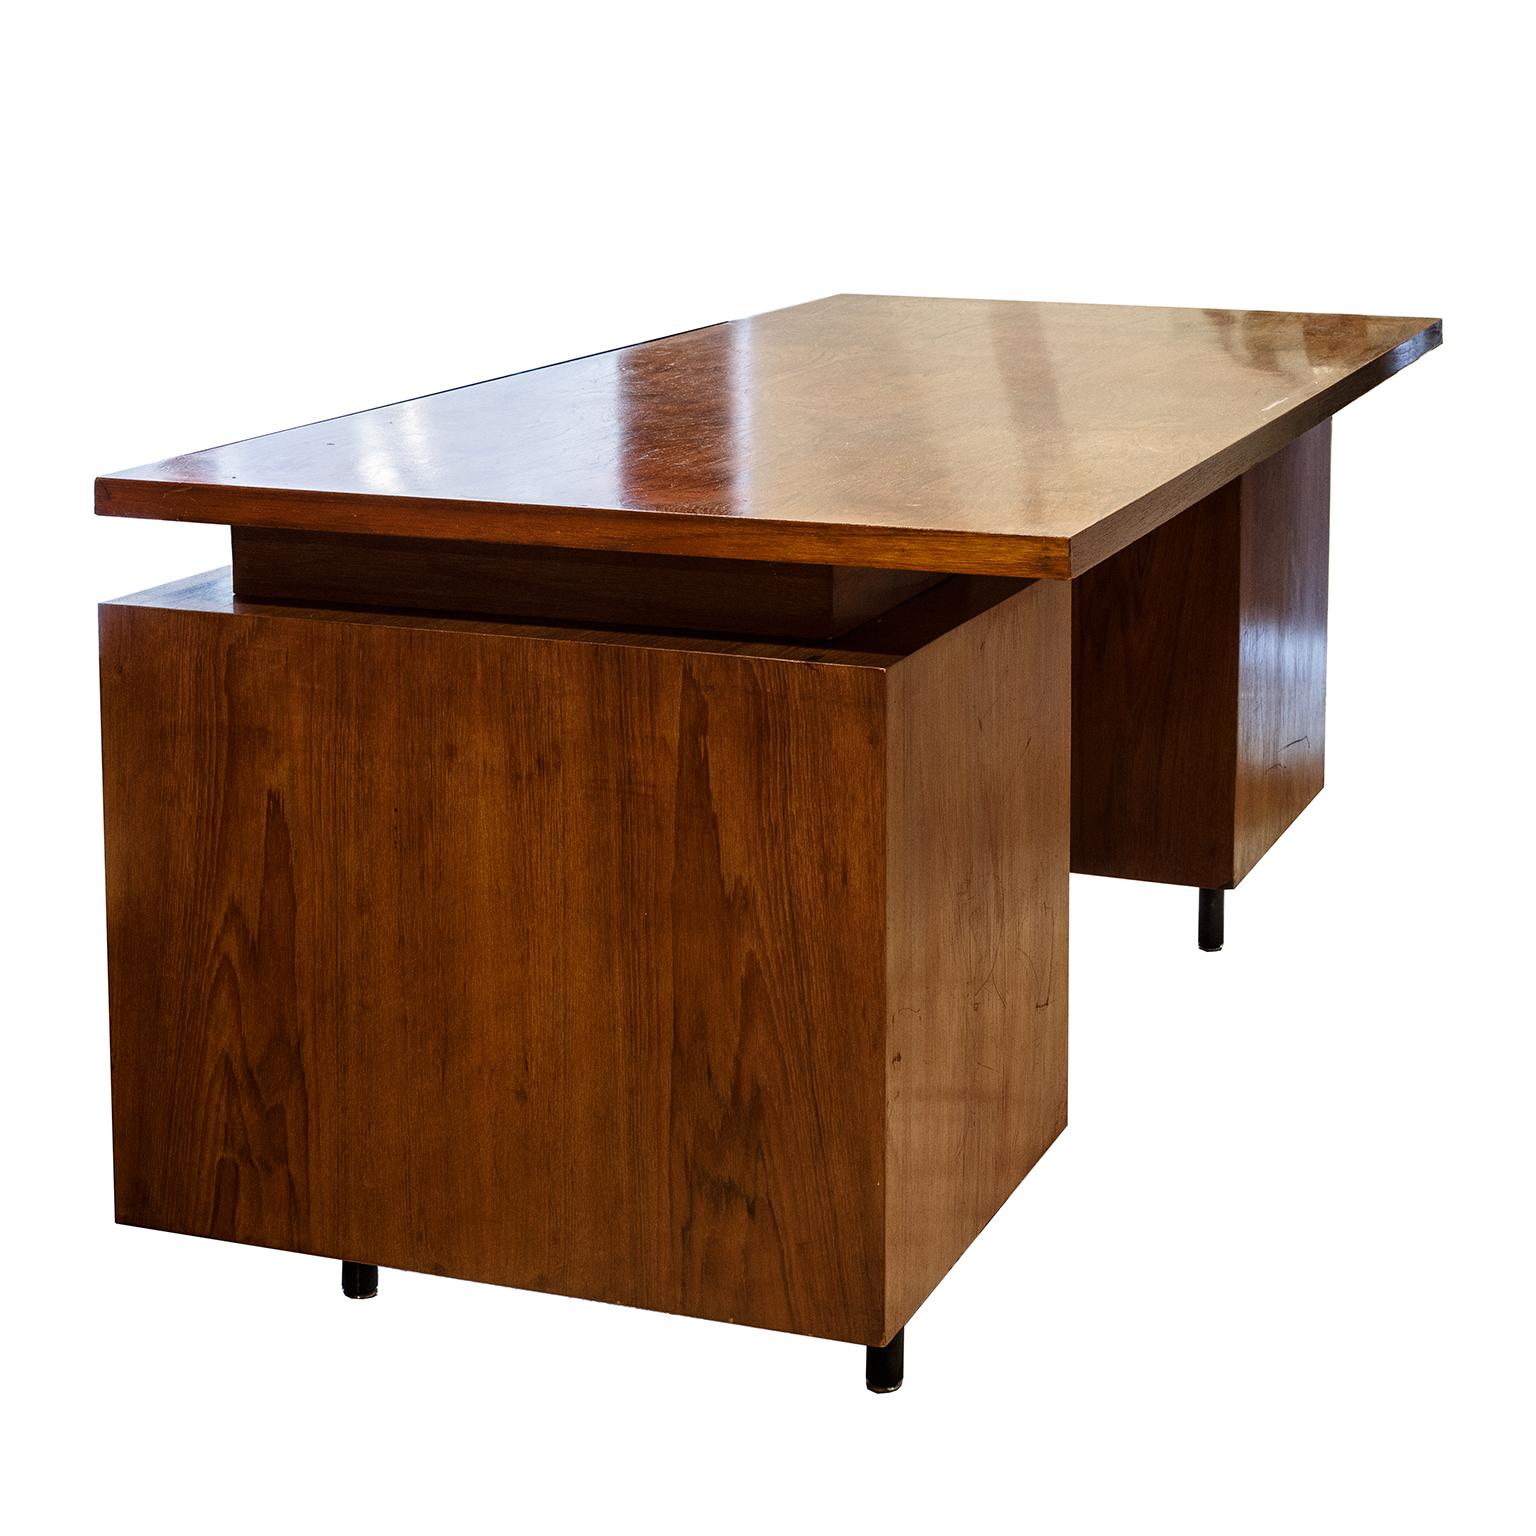 George Nelson designer writing desk in rose wood legs in Stel from Hermann Miller Production 1960s United States.